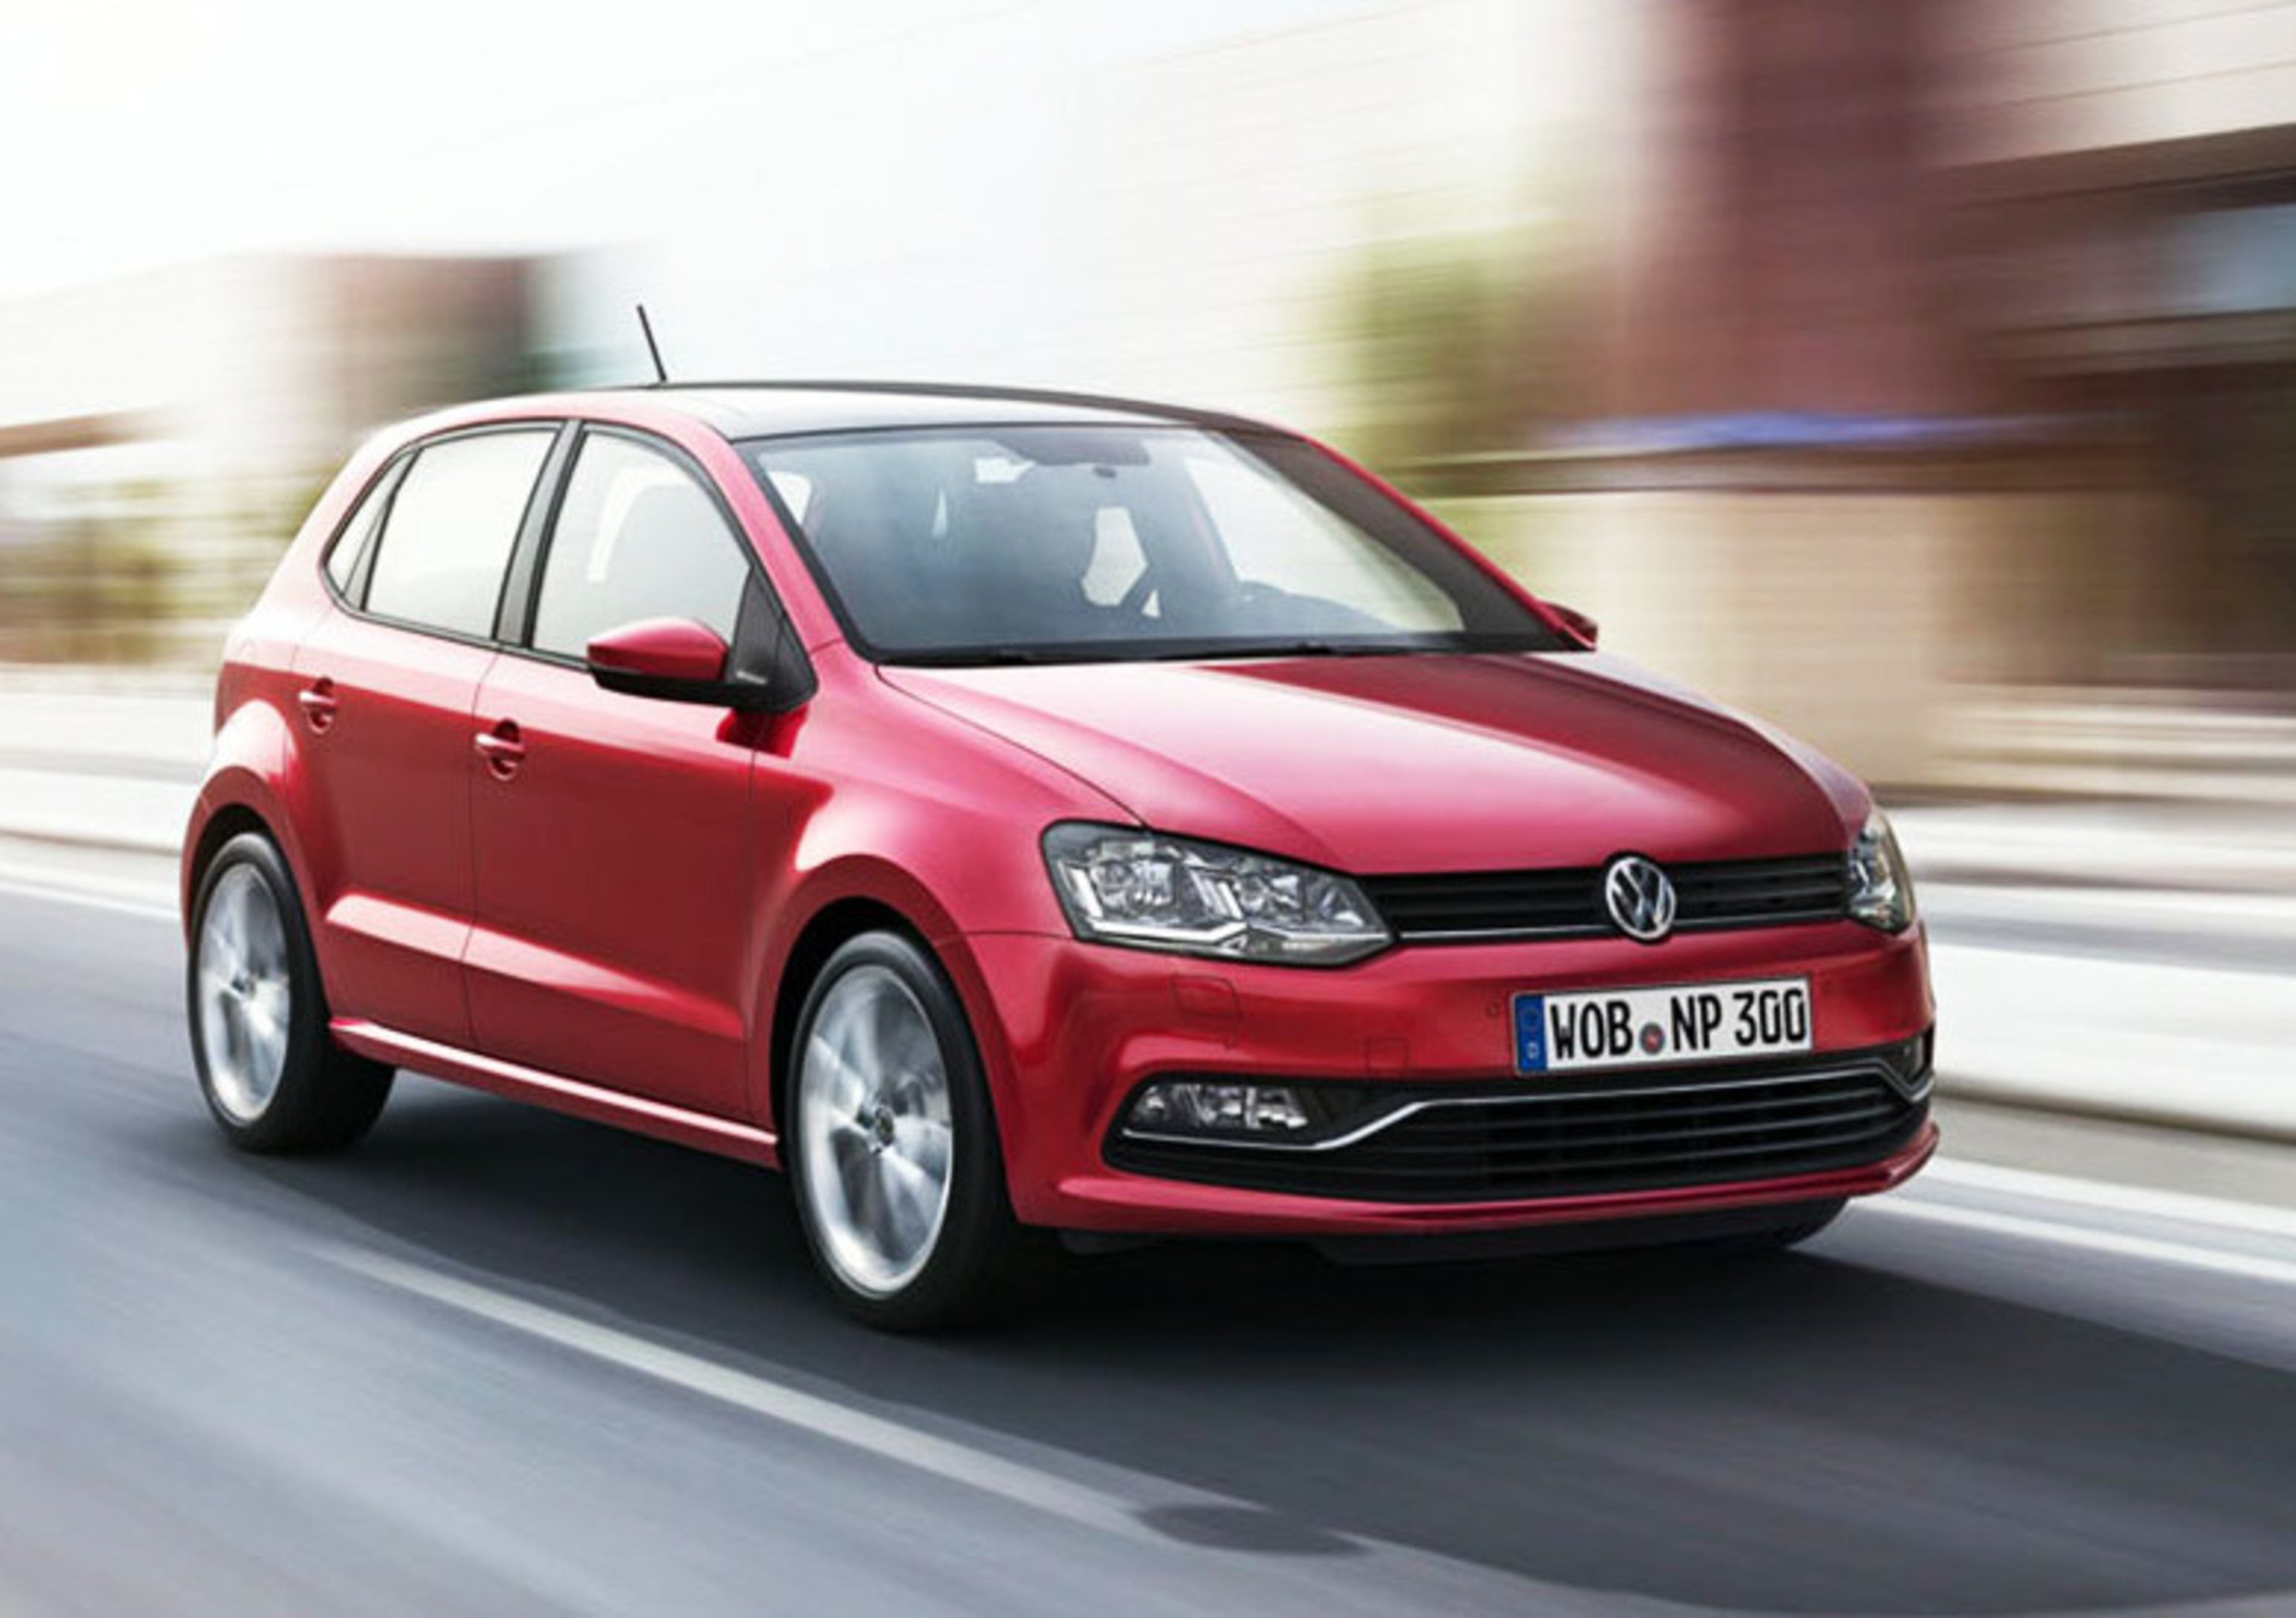 Volkswagen Polo restyling